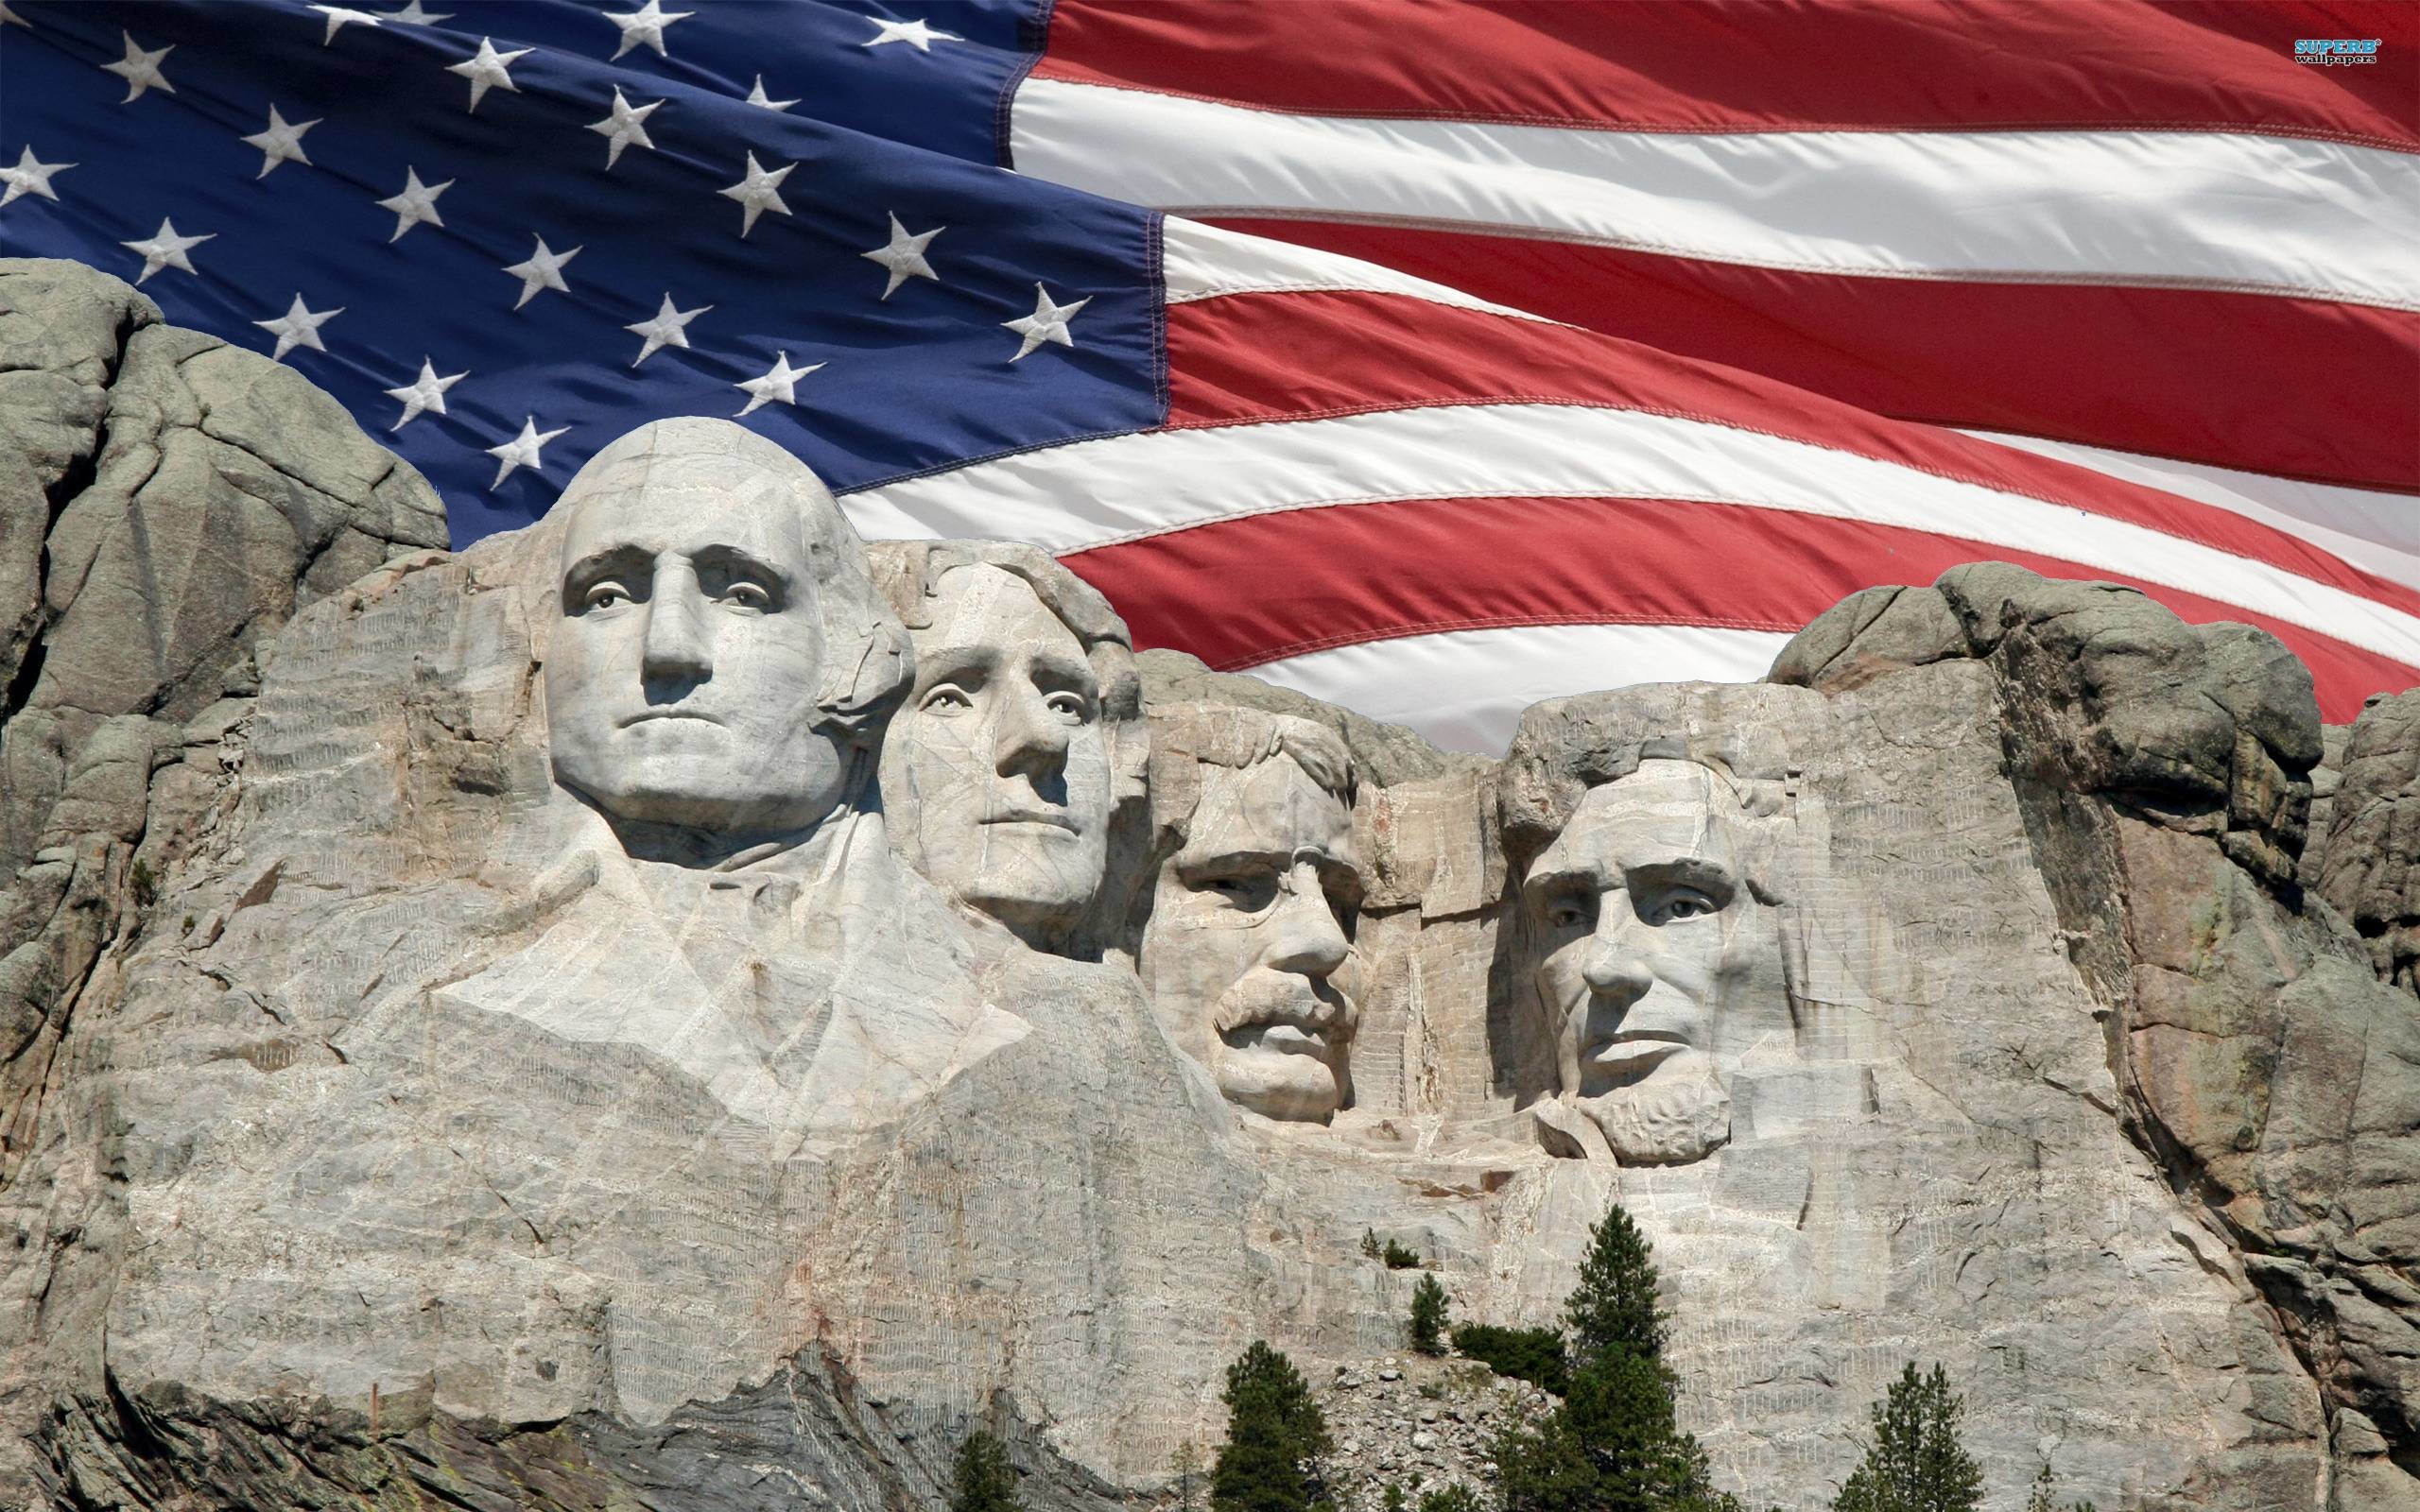 2560x1600 Presidents day wallpaper - Holiday wallpapers - #10650